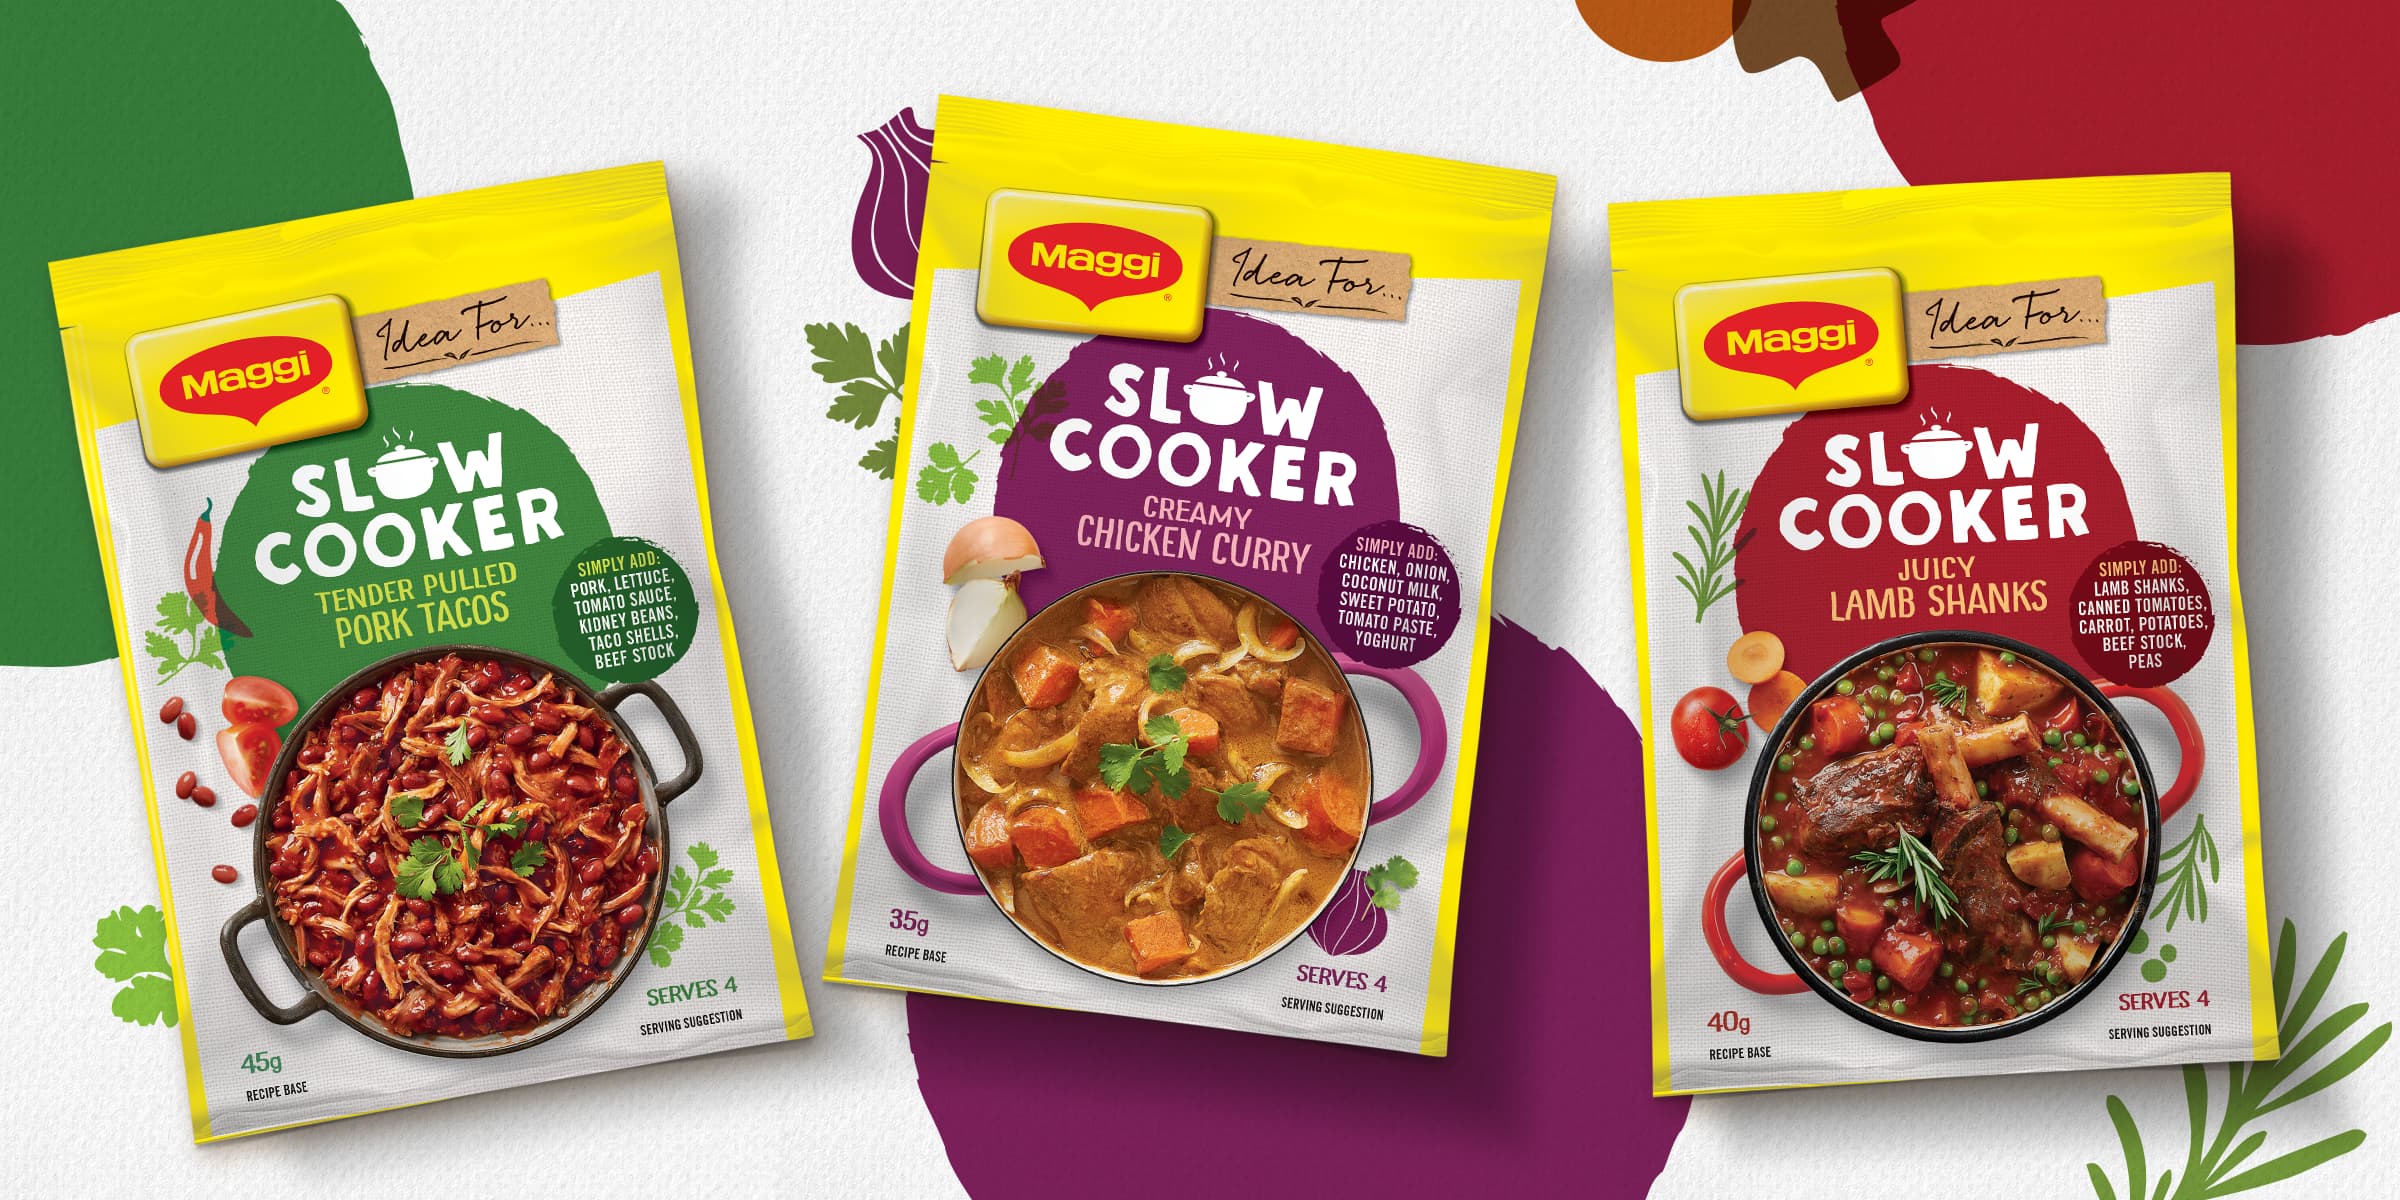 boxer-and-co-sydney-design-agency-slow-cooker-packaging-redesign-lamb-shanks-chicken-curry-pork-tacos-maggi-range-recipe-base